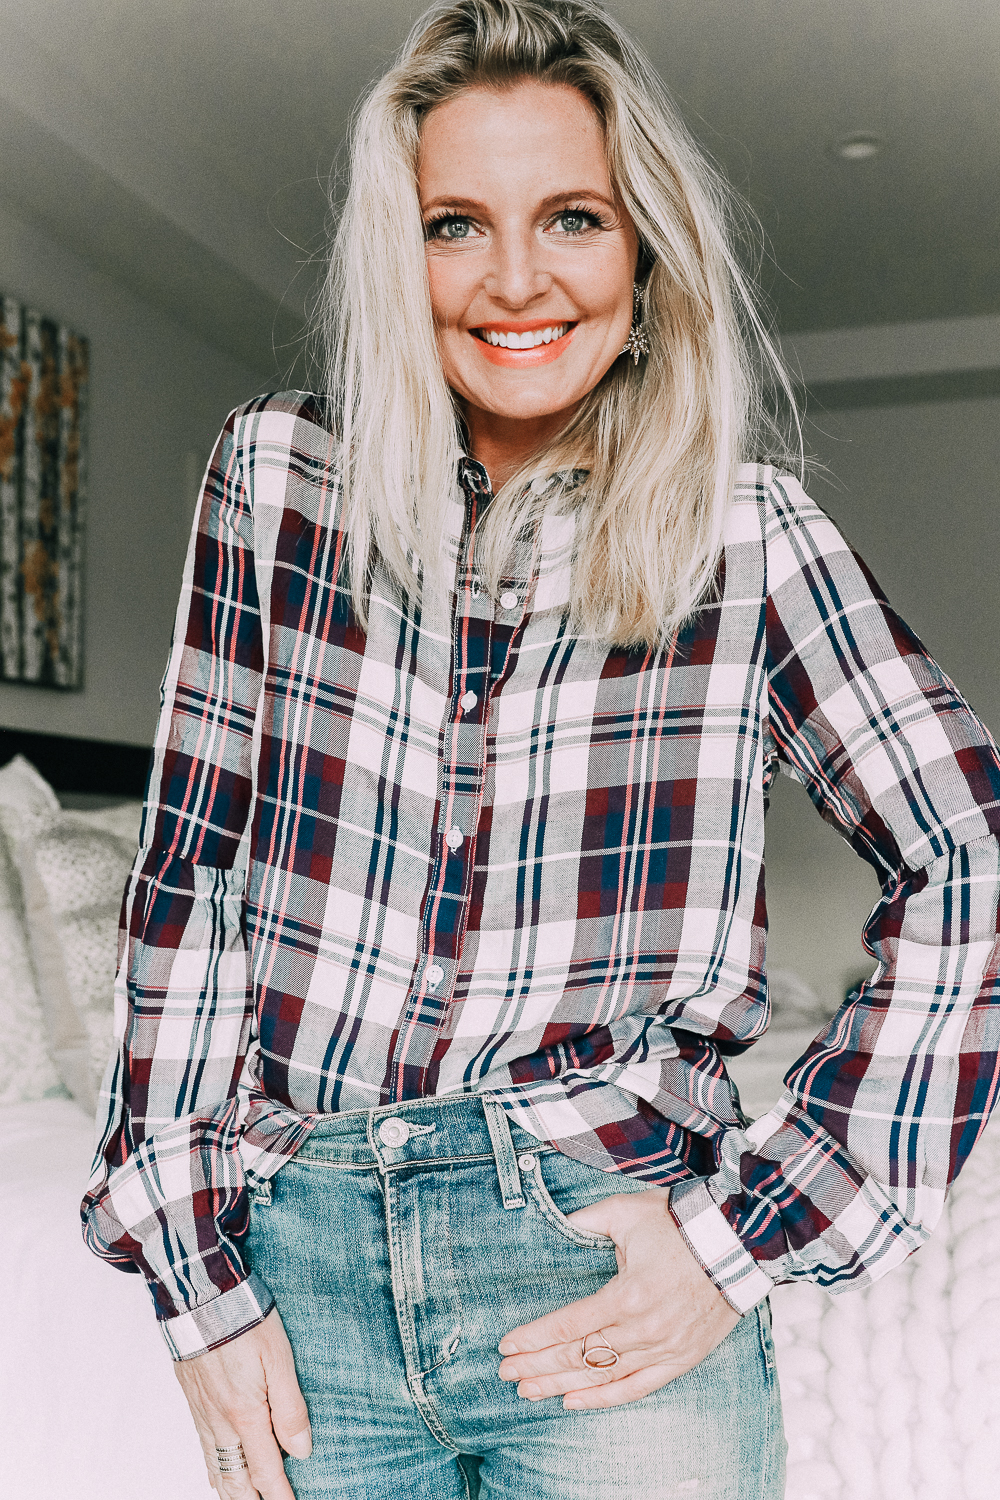 Blonde woman wearing a plaid shirt with bubble sleeves from Walmart with jeans sharing updating your fall wardrobe under $50